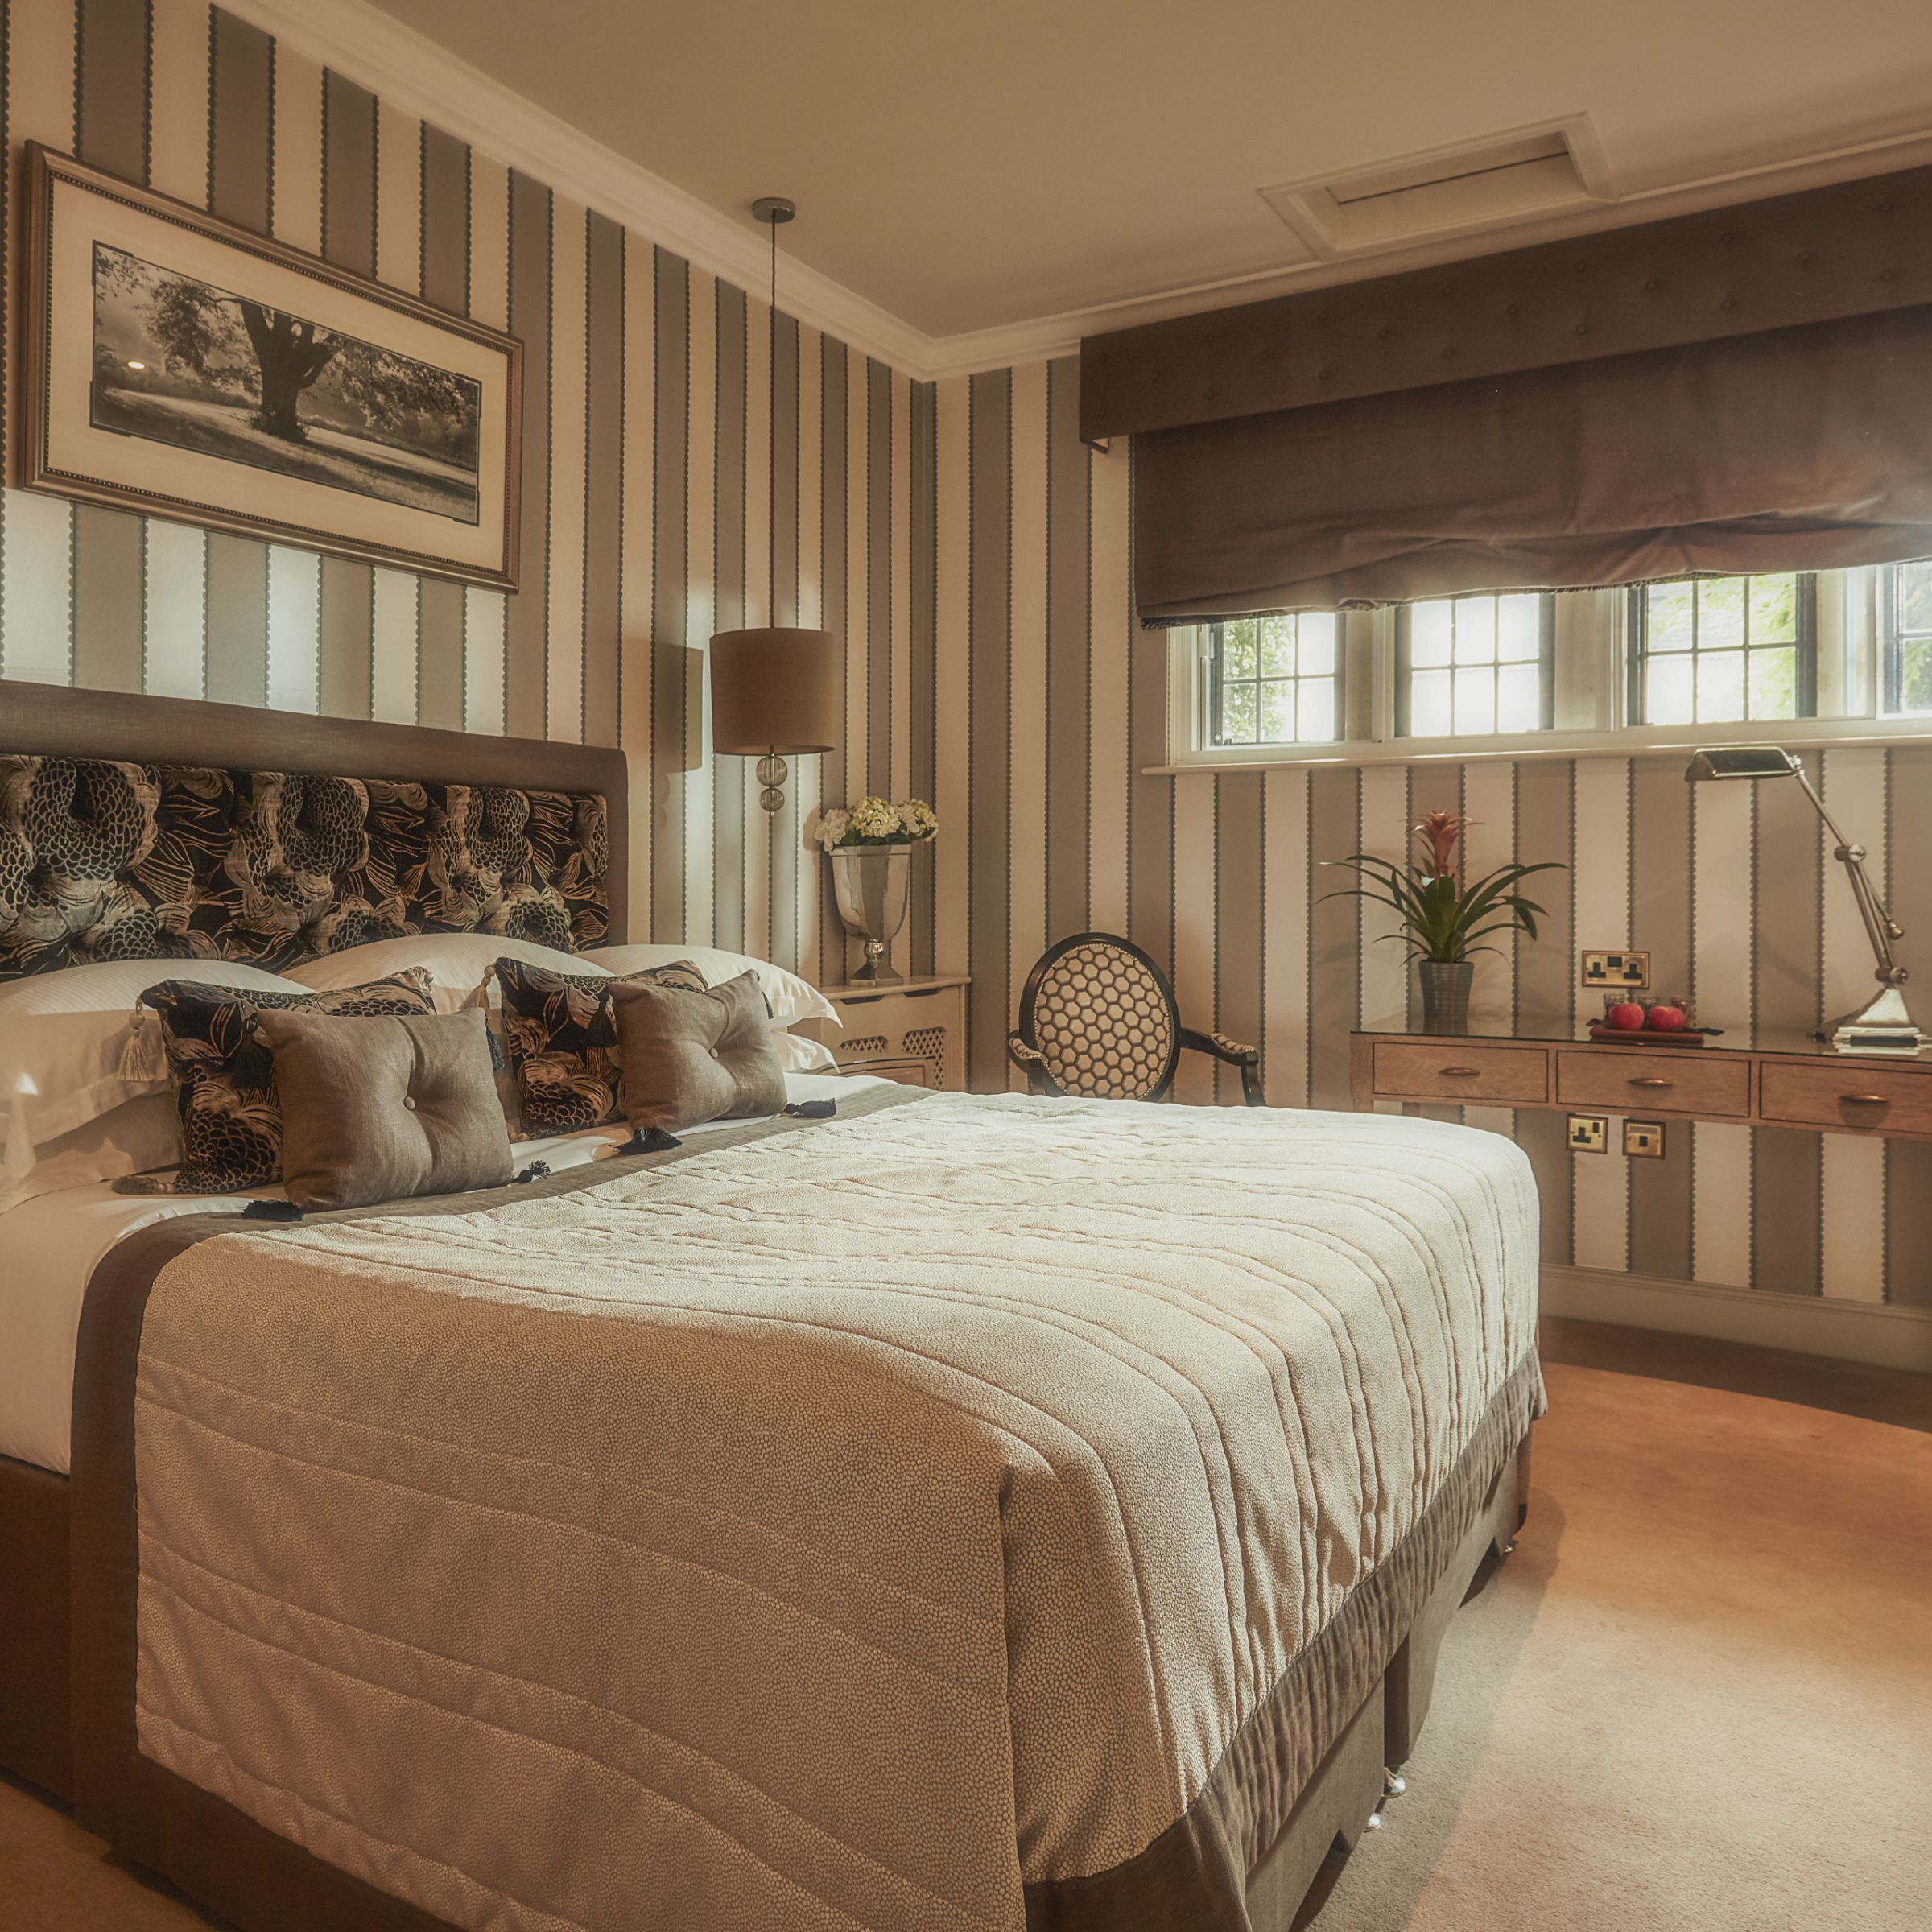 Bovey Castle luxury bed and room